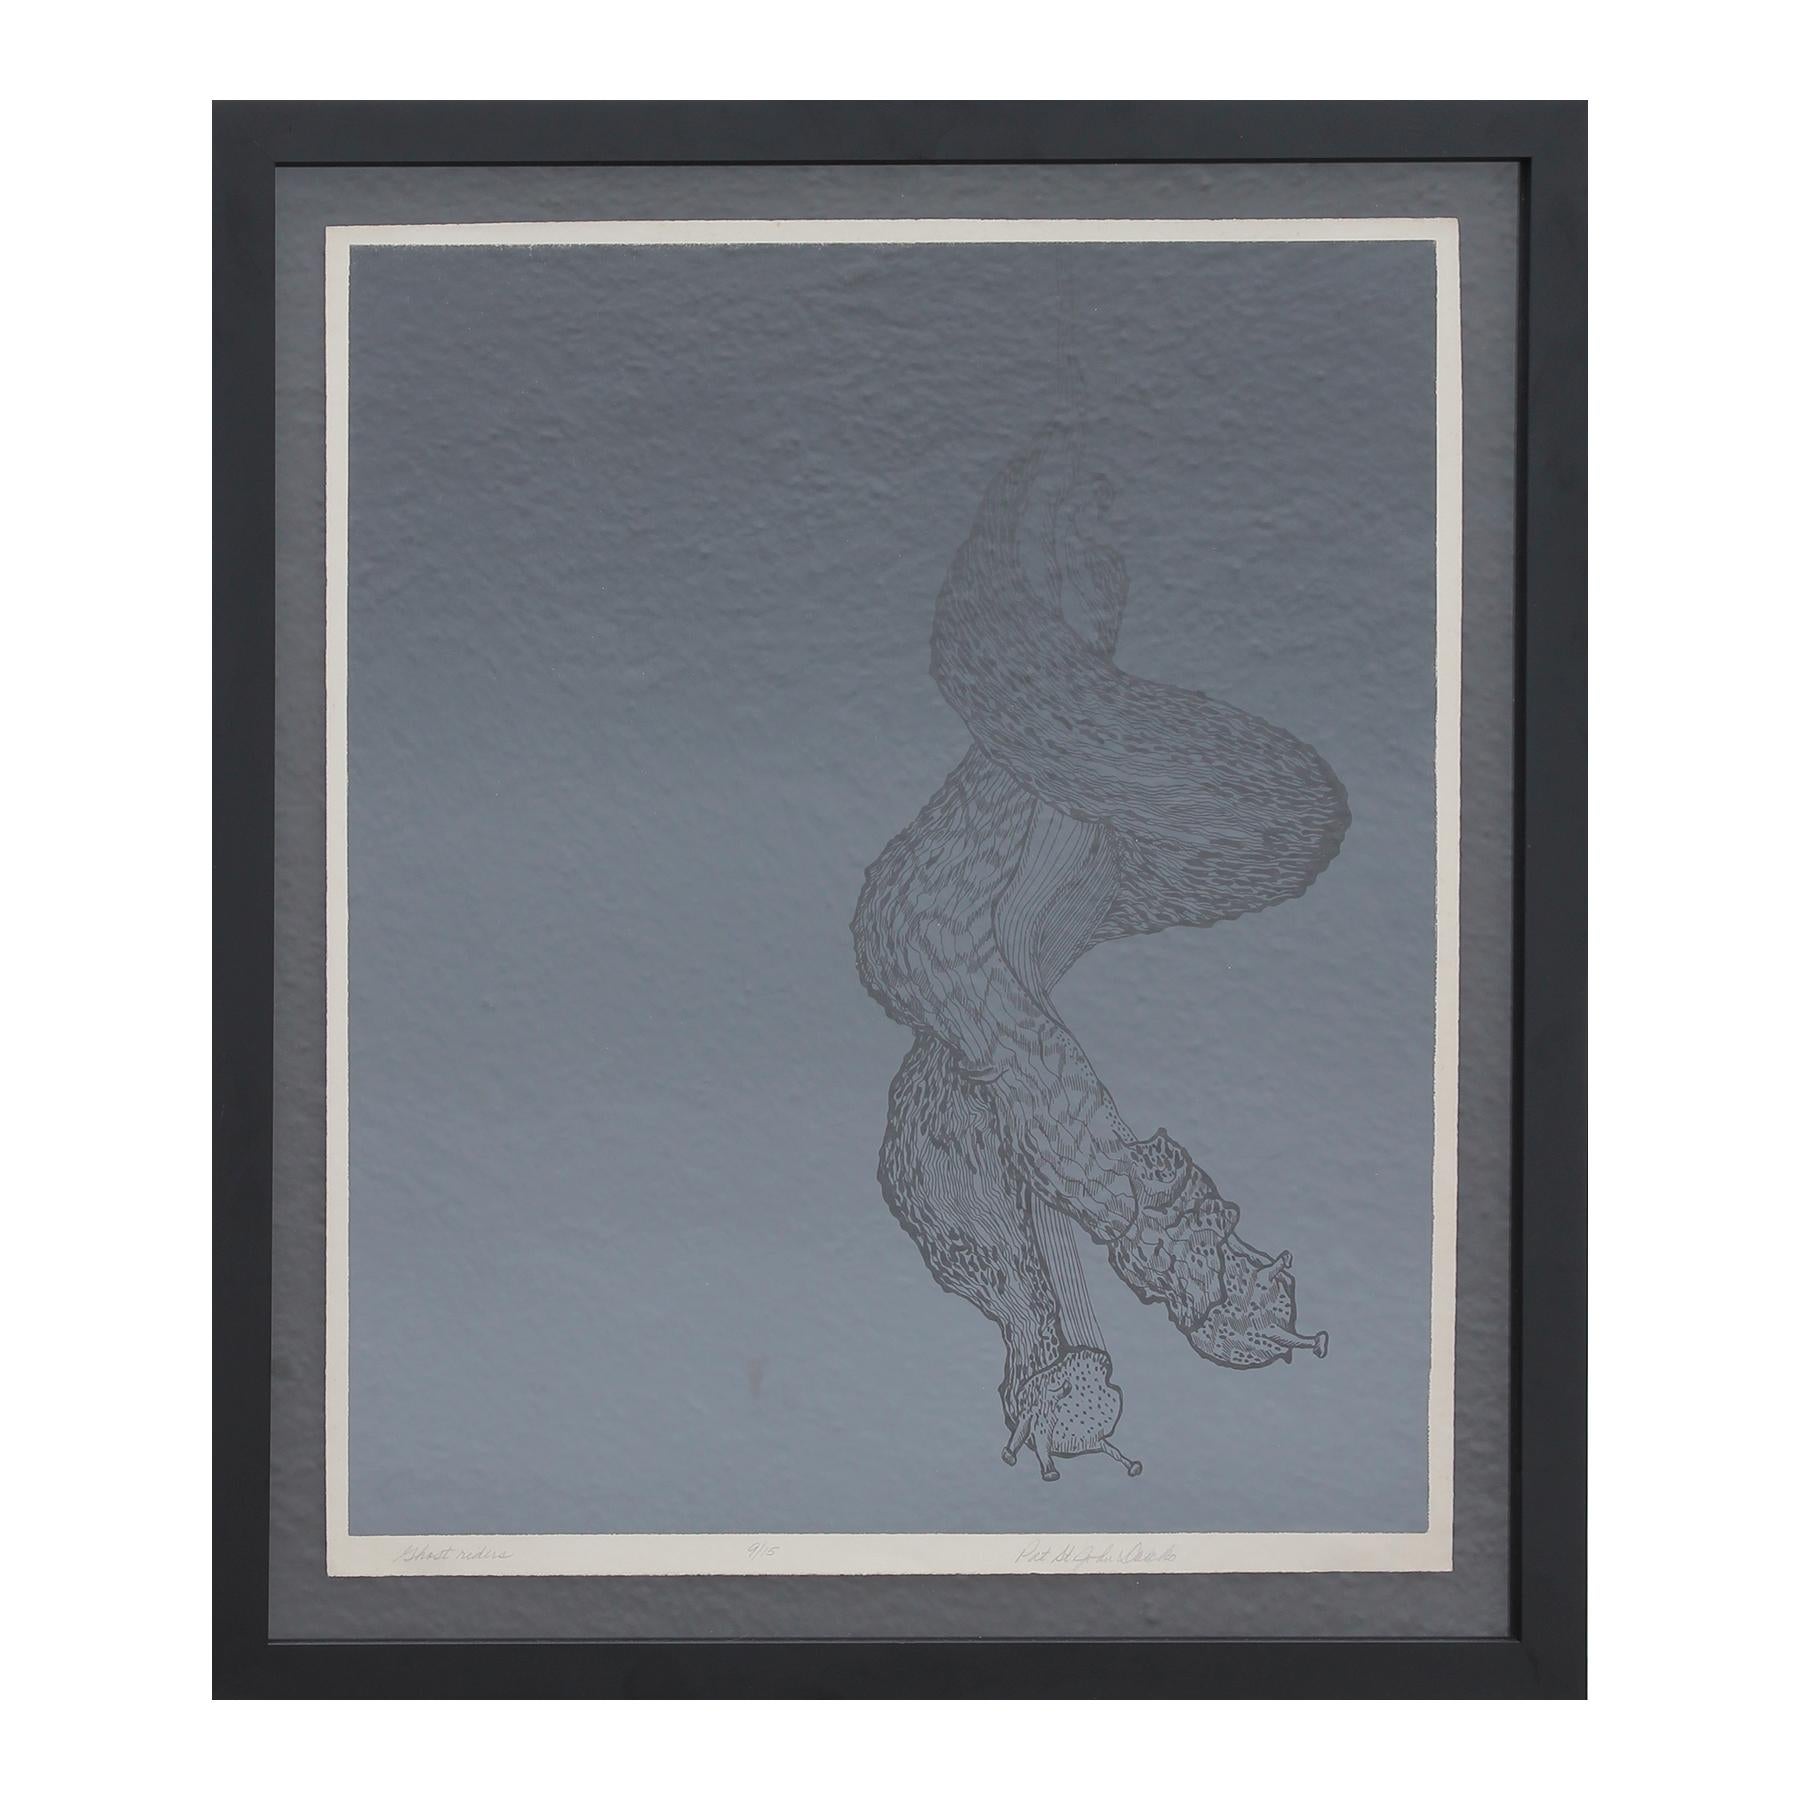 Jane Danko Abstract Print - “Ghost Riders” Abstract Modern Grey Toned Intertwined Snail Screen Print Ed 9/15